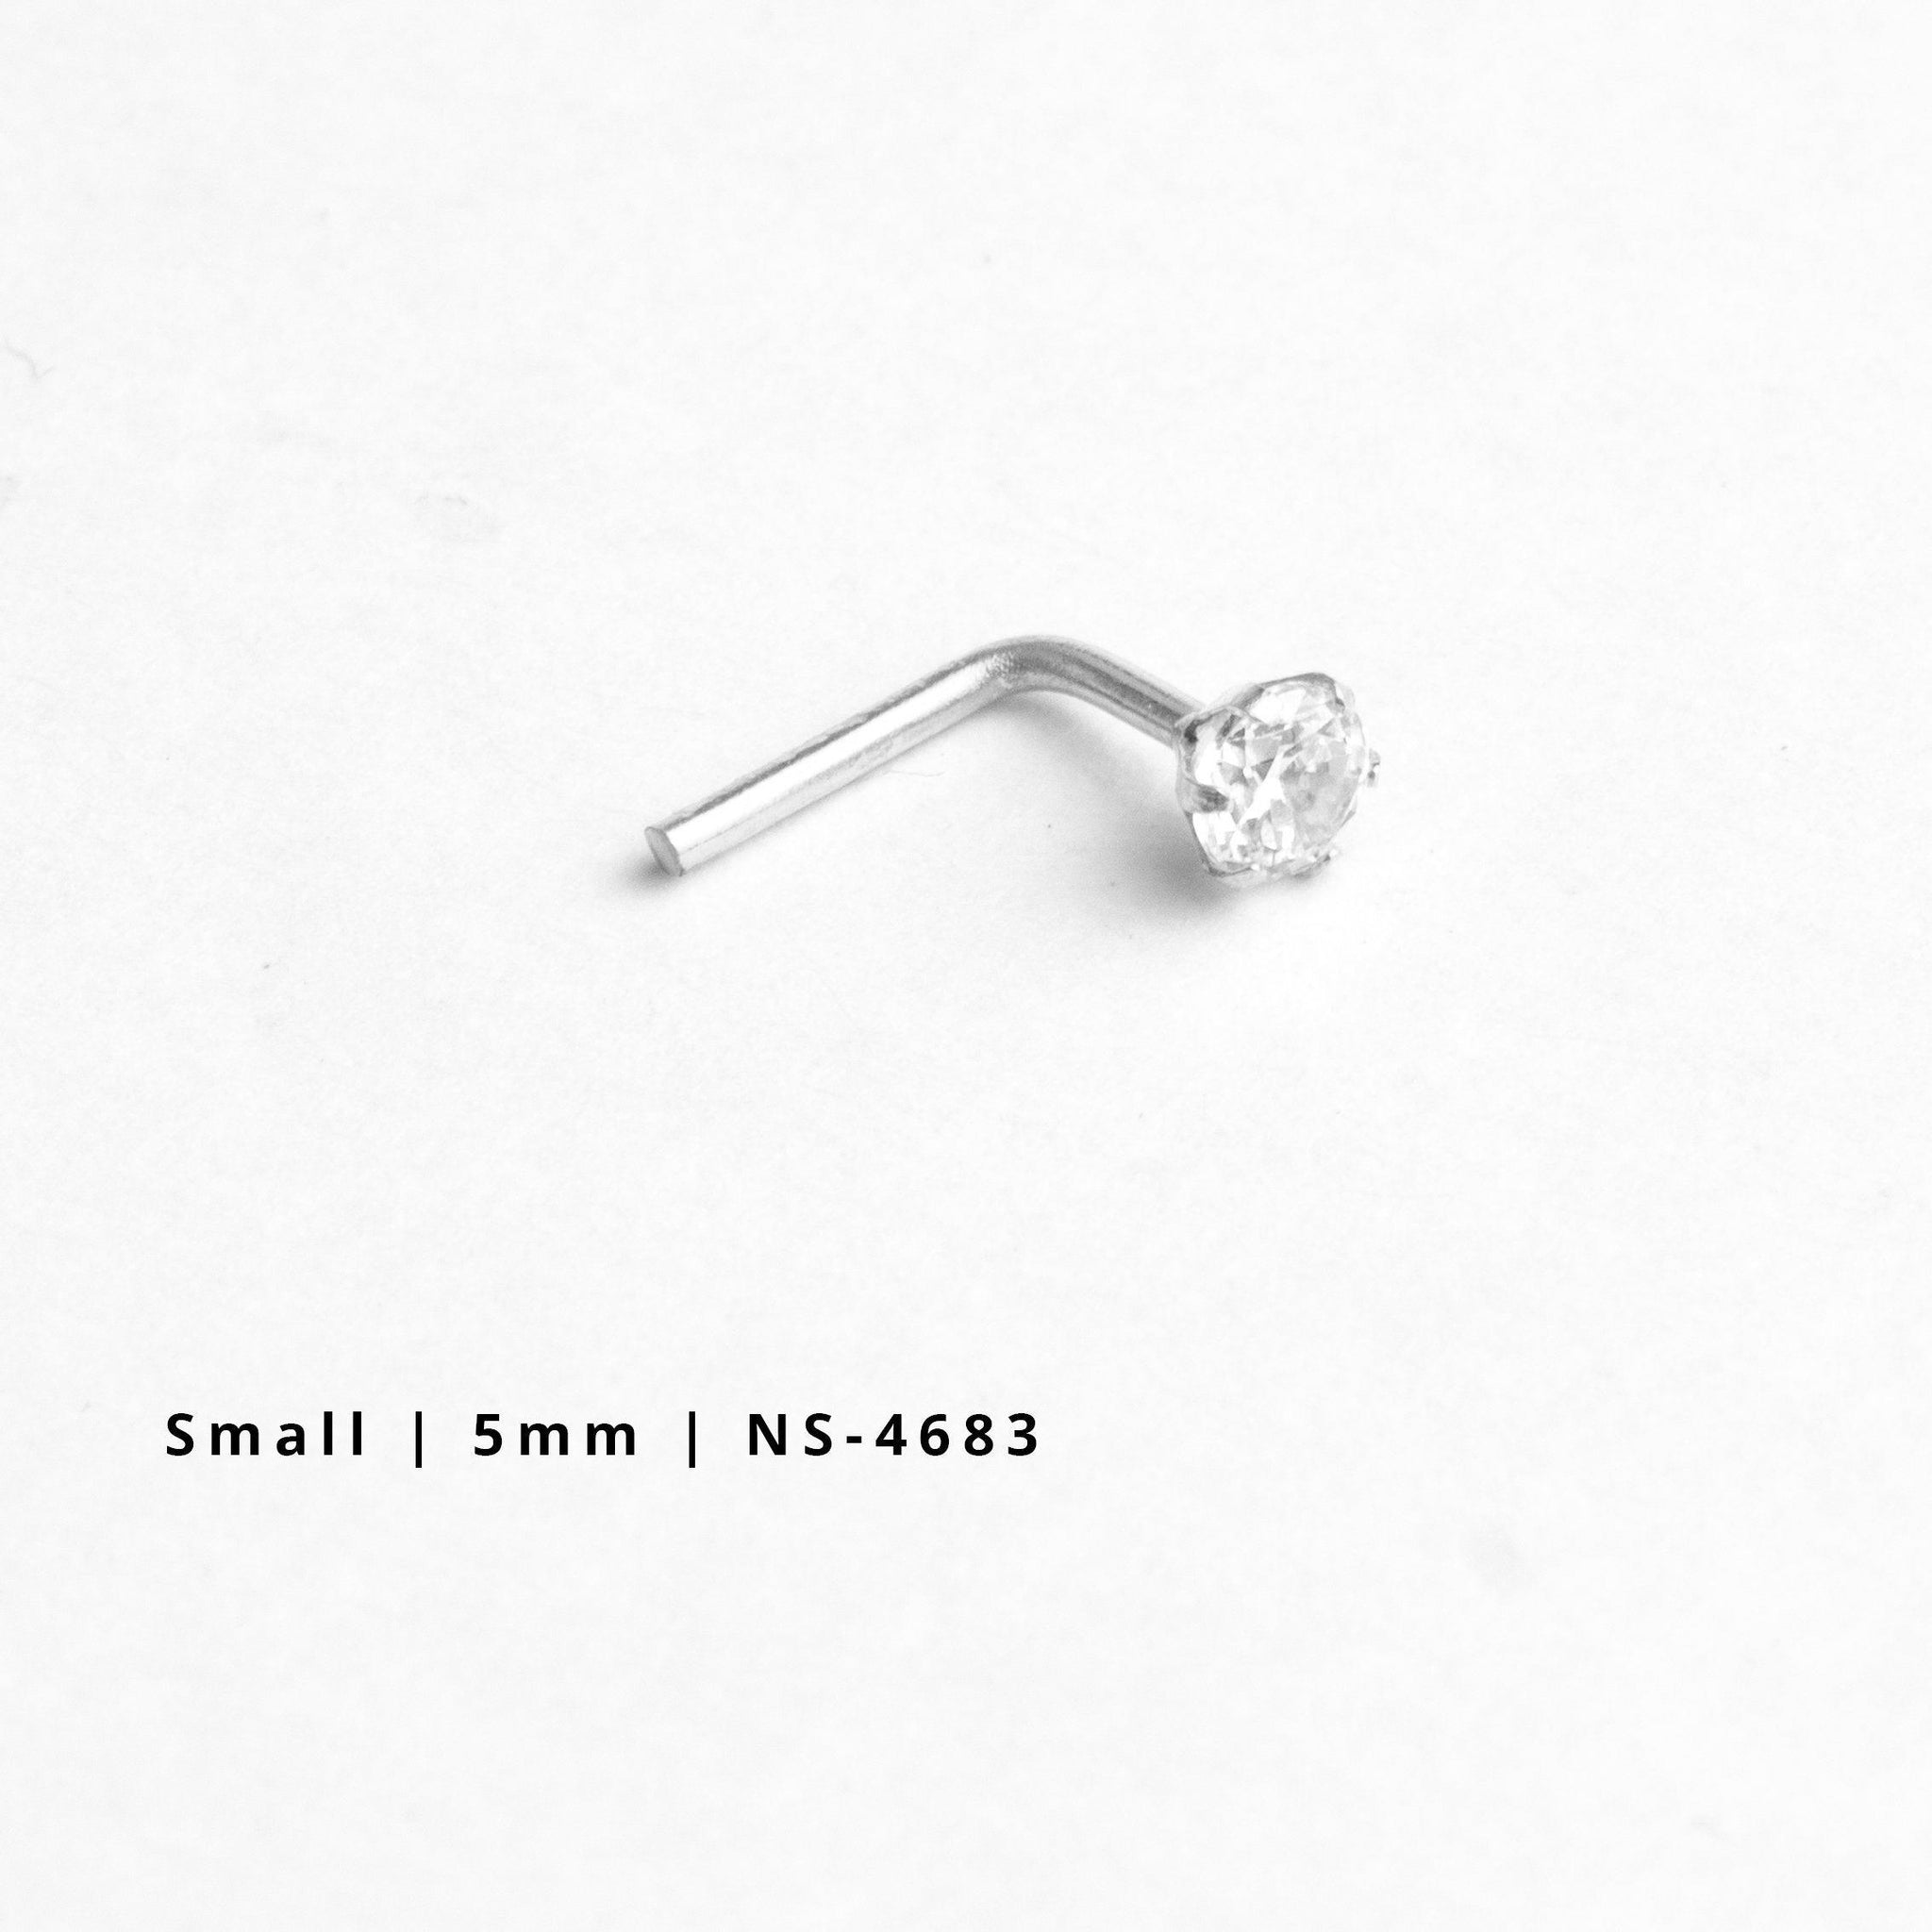 18ct Gold Nose Stud L-Shaped back with a Cubic Zirconia Stone (2mm - 3.5mm)